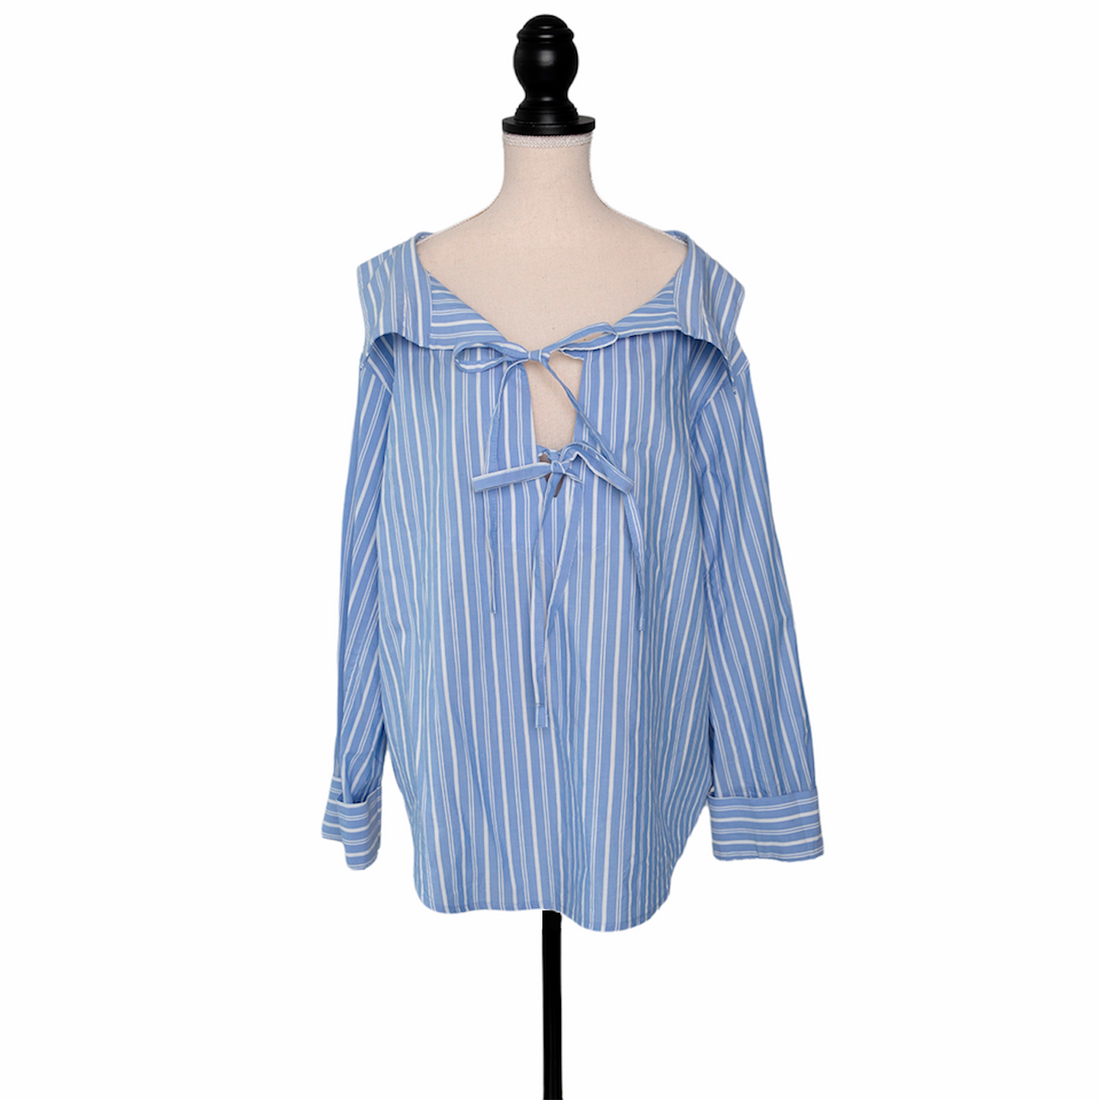 Clu blouse with bow details